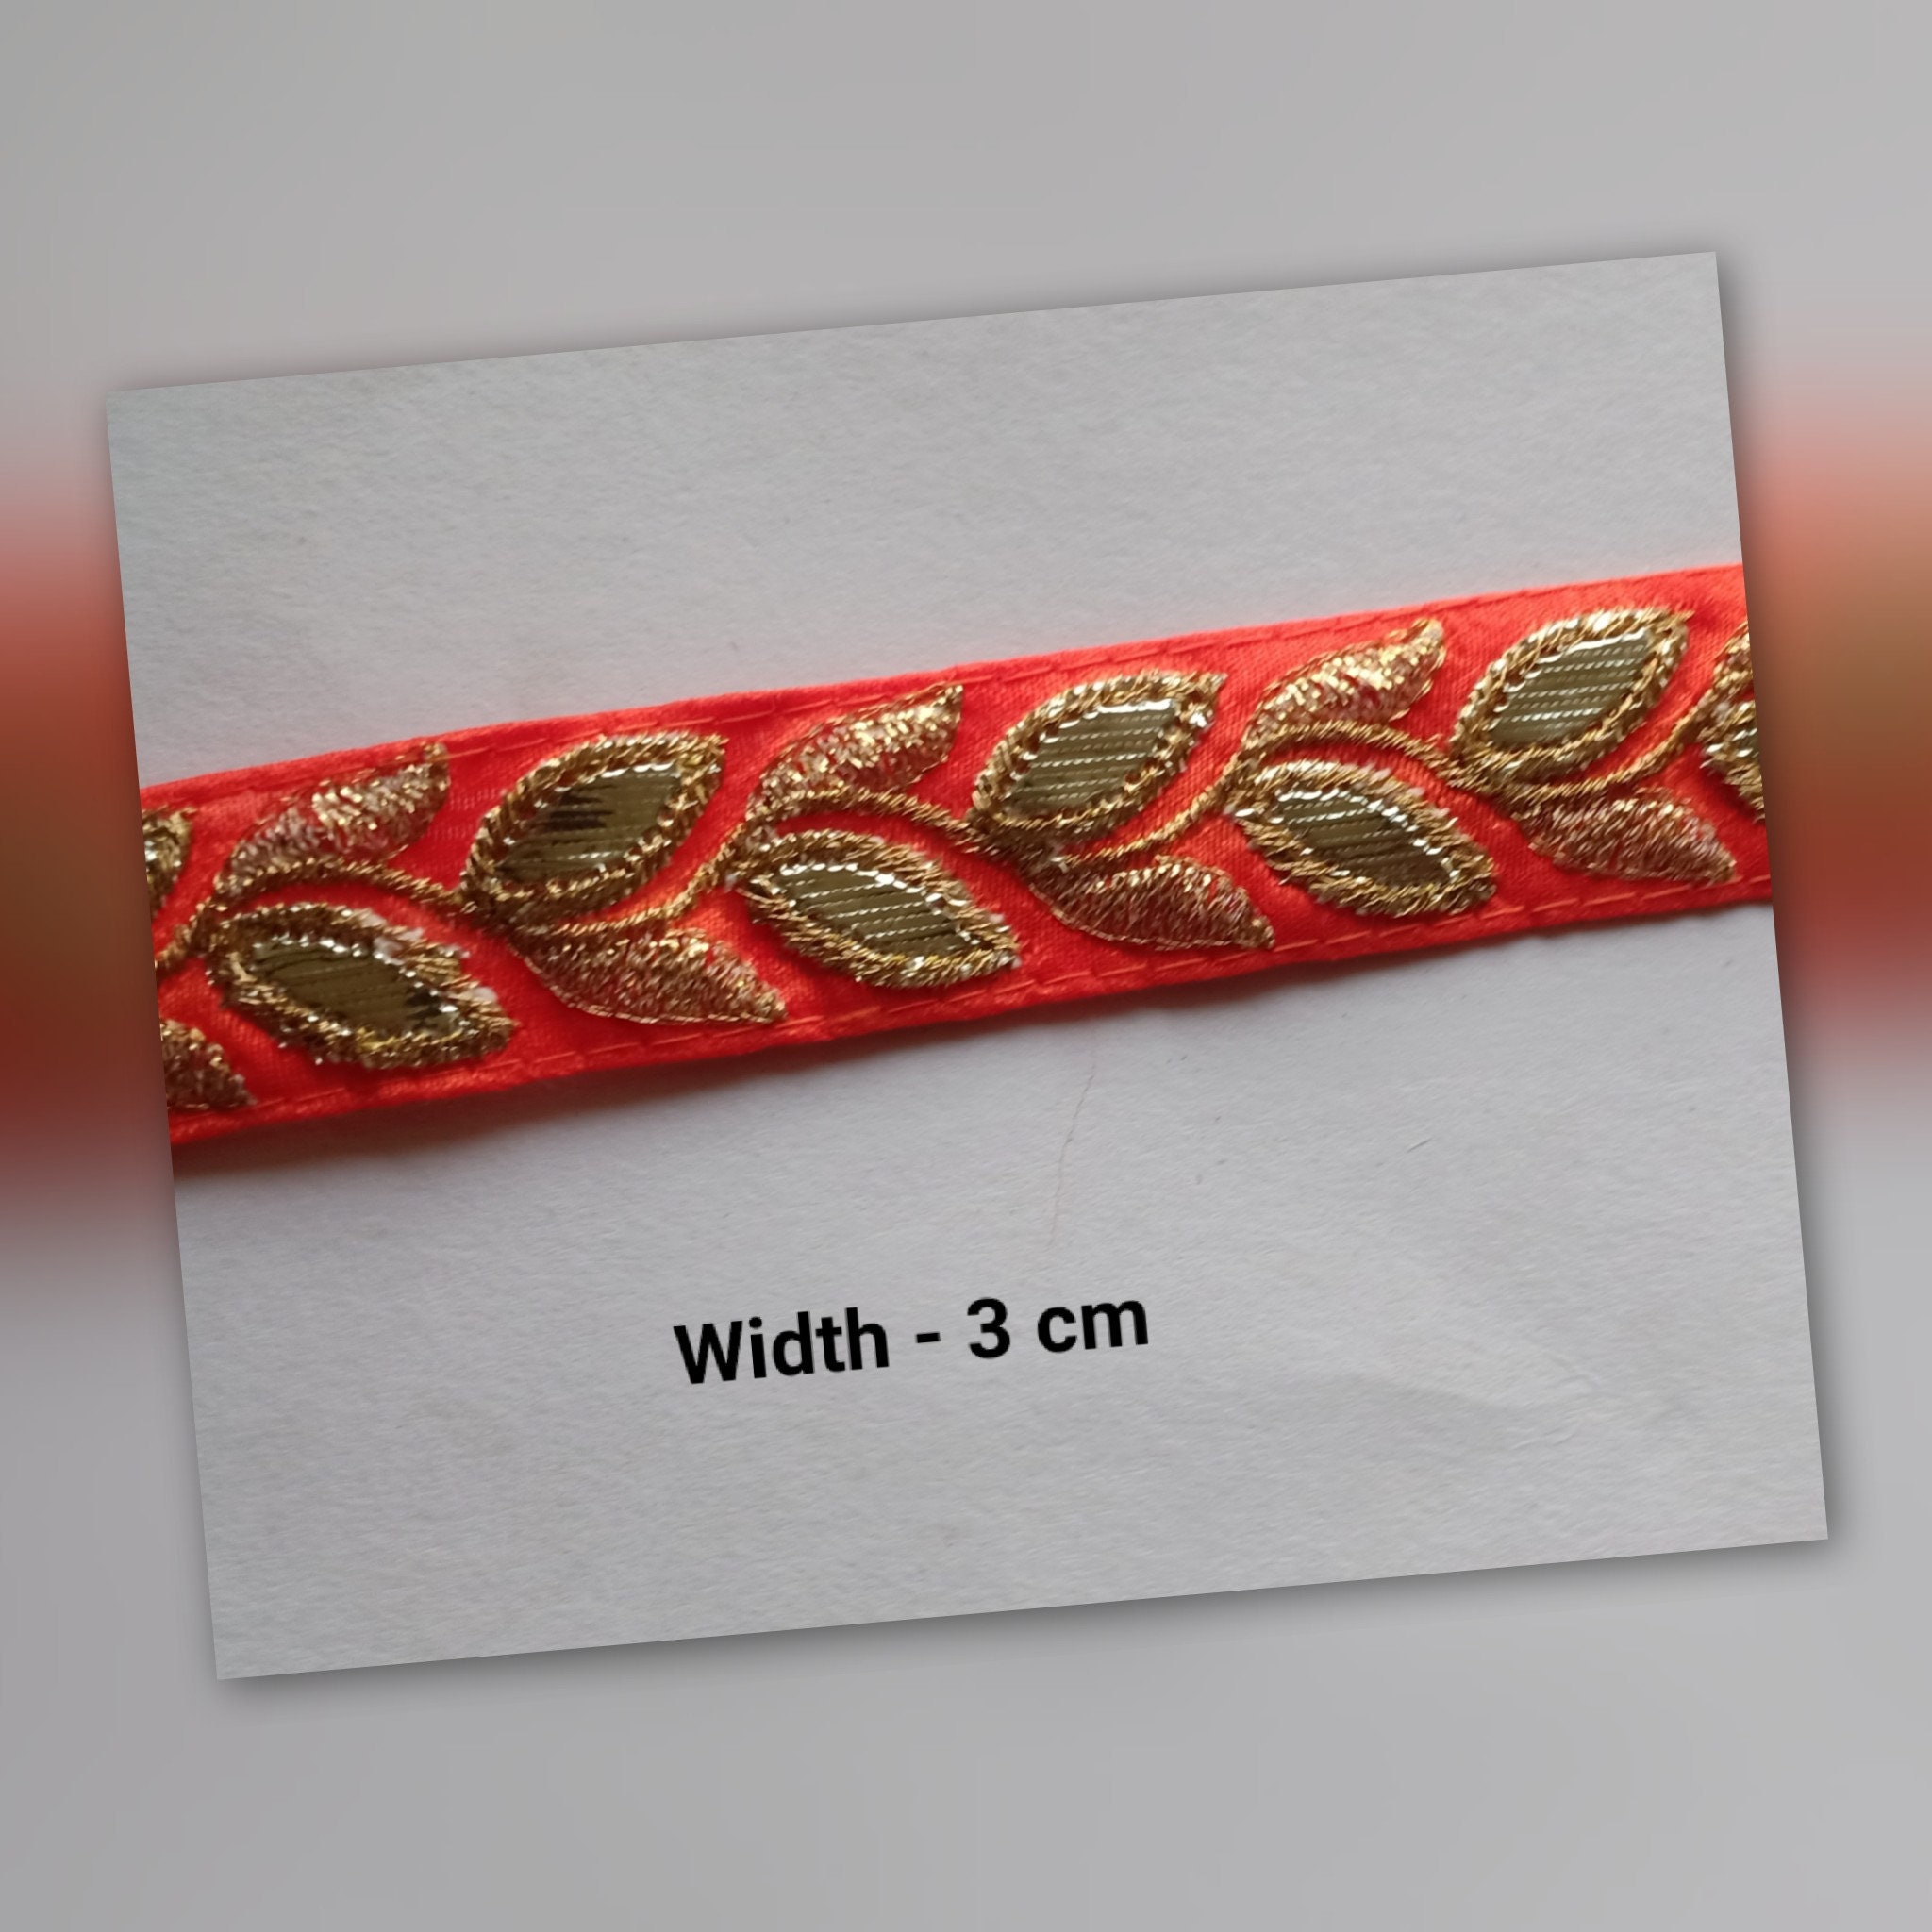 2 Yards Red and Gold Trim Width is 3 cm